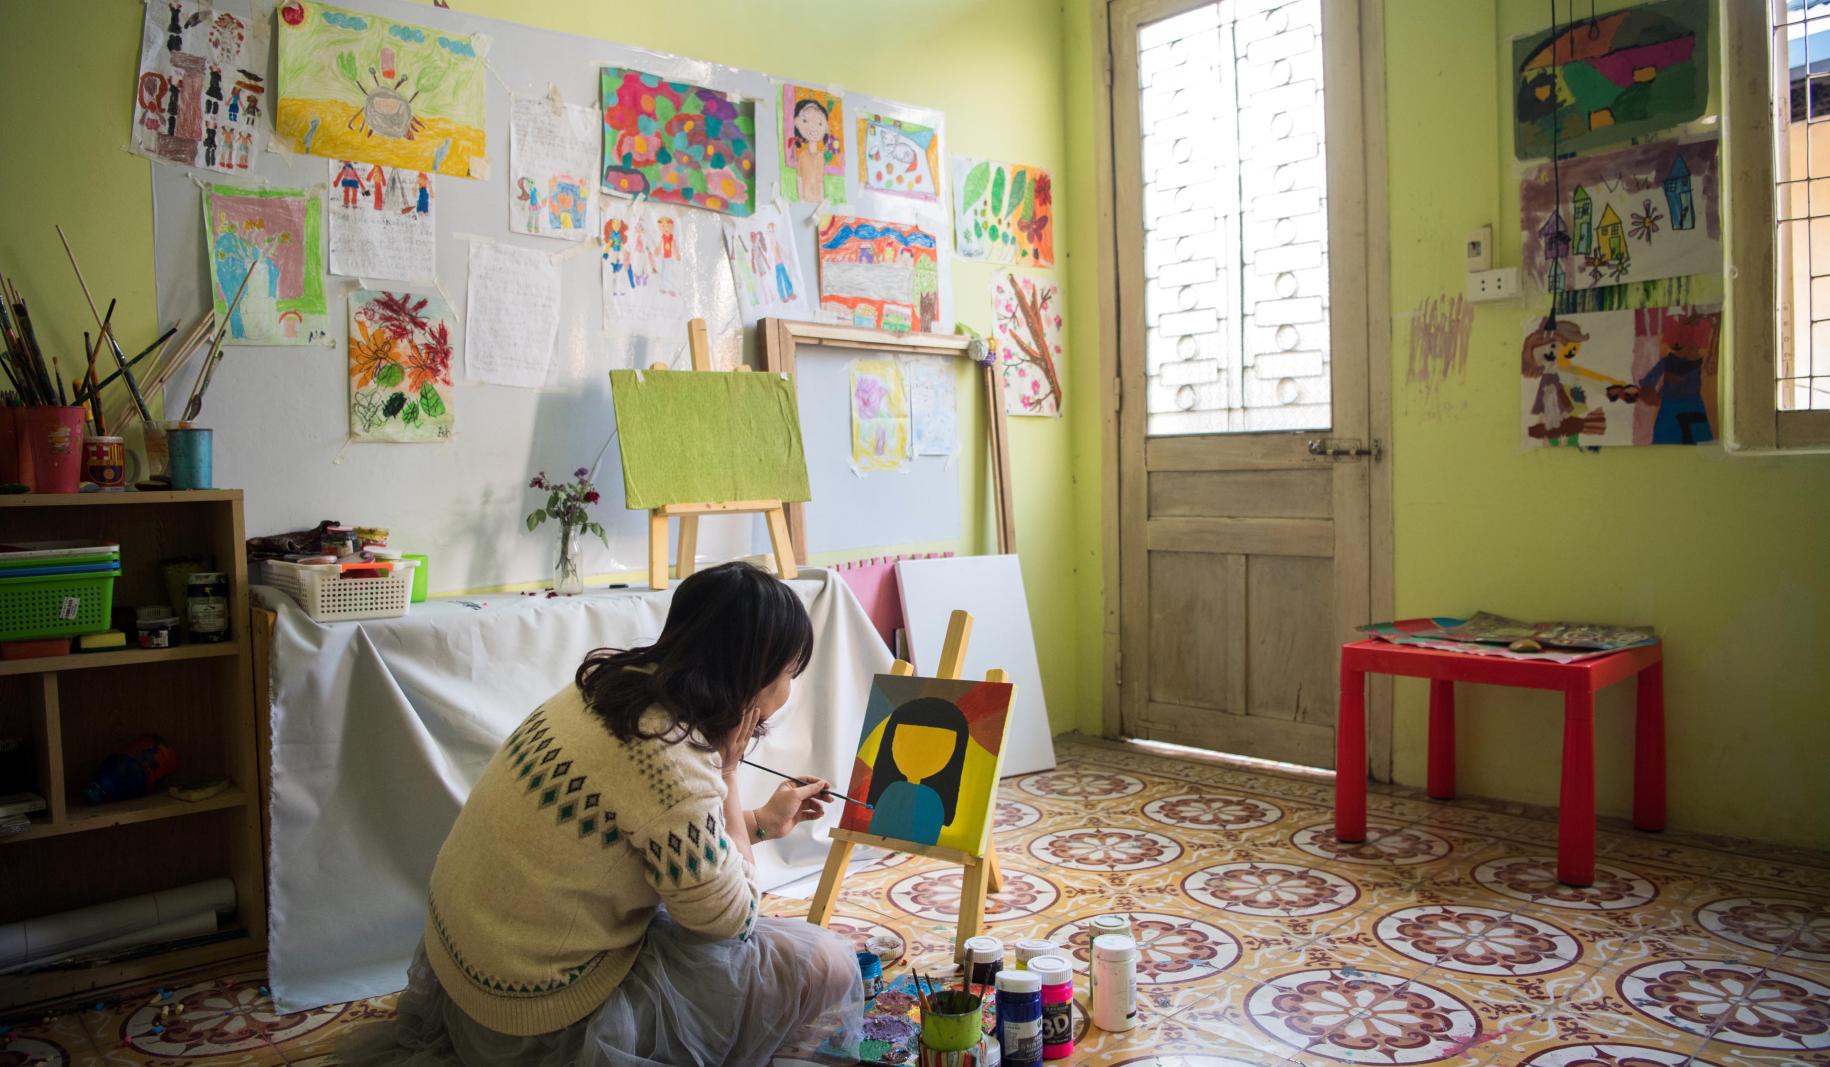 Tu Thanh Thuy sits on the floor of an art space and paints a picture placed on a small canvas.